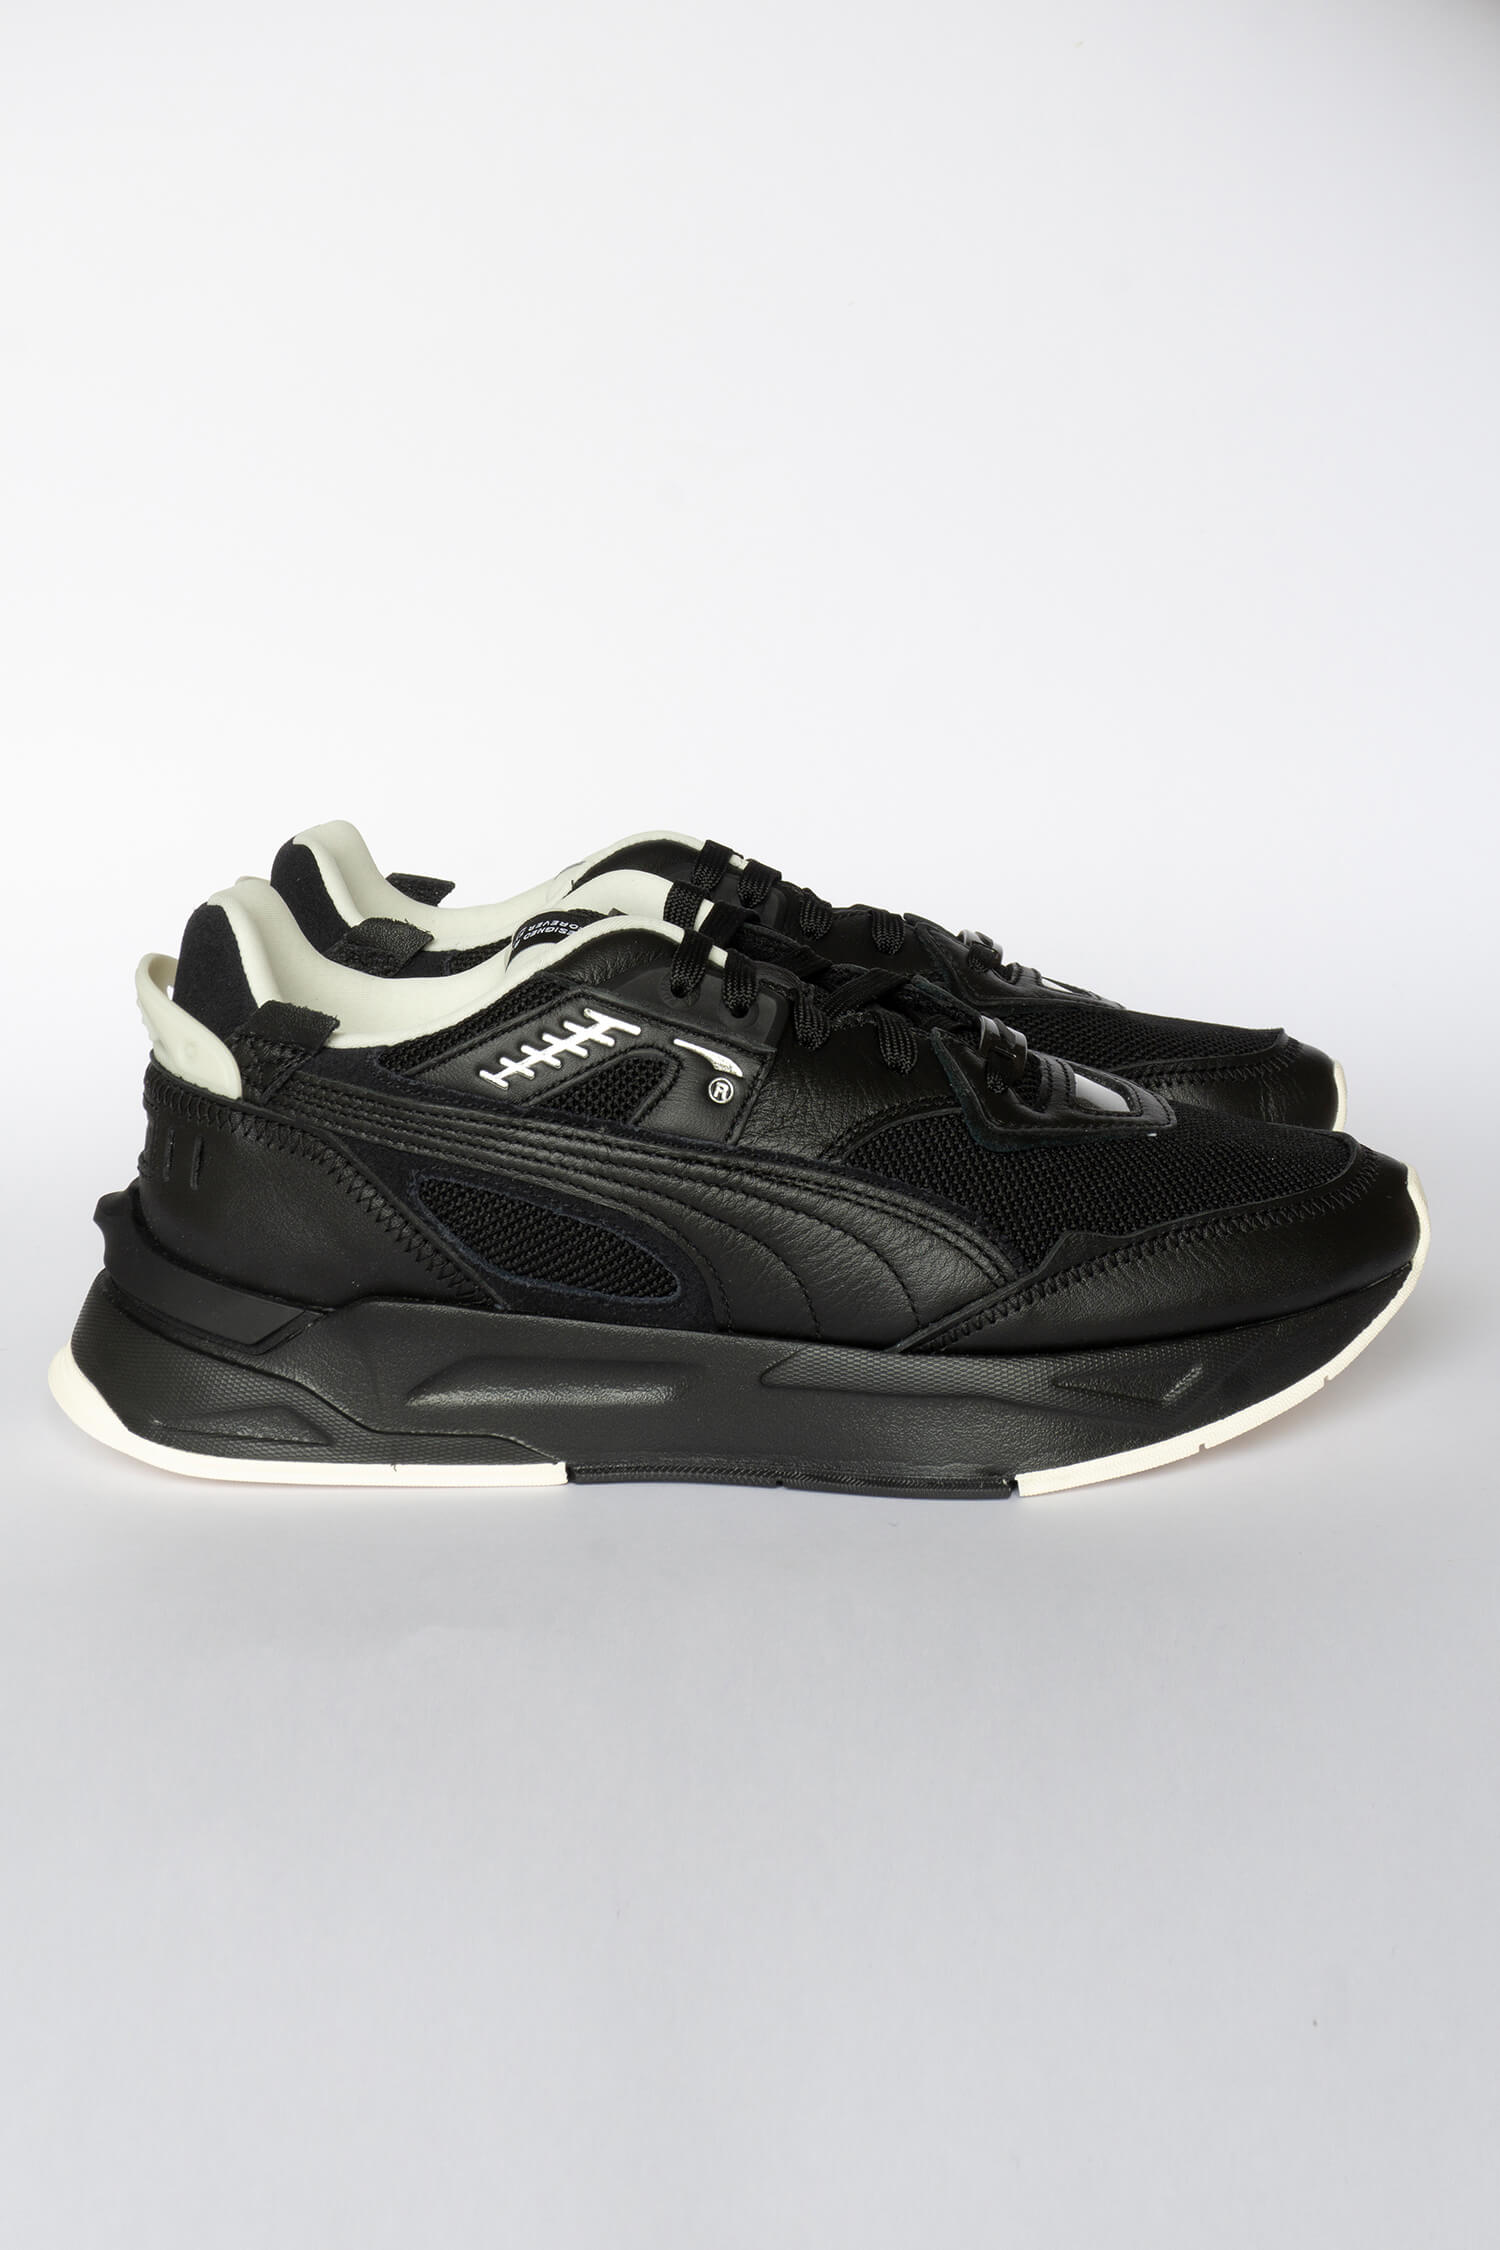 String string kromme Ciro Shop PUMA Mirage Sport Luxe Sneakers at The Wasted Hour – wasted hour -  concept store